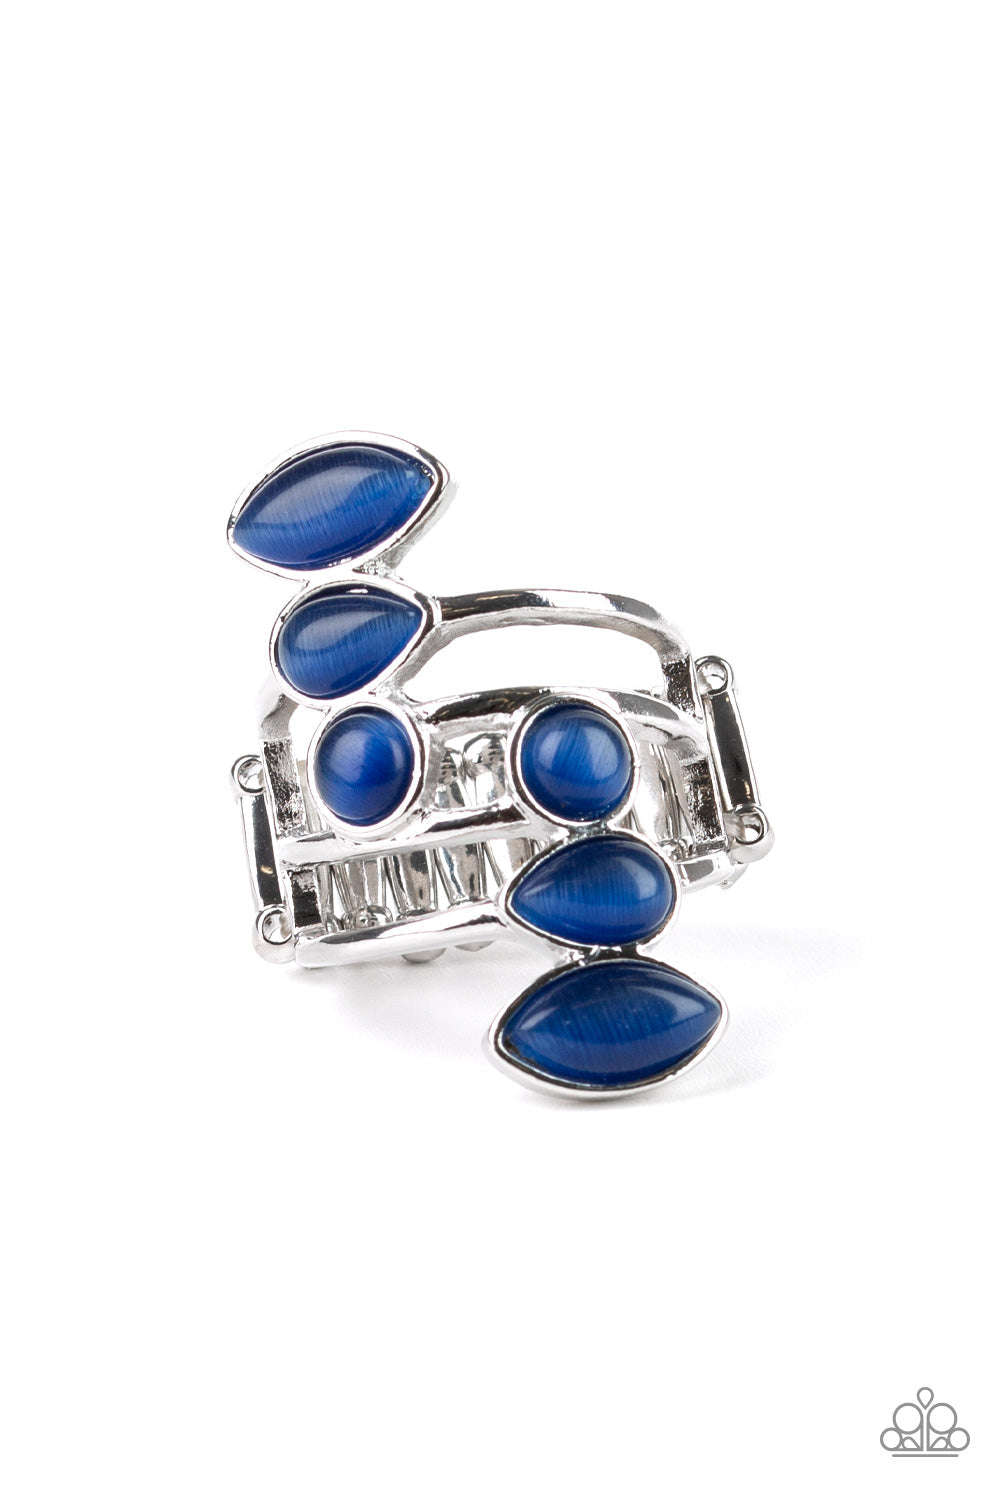 Wraparound Radiance - Blue and Silver Ring - Featuring round, teardrop, and marquise shapes, two frames of glowing blue cat's eye stones stack across a layered silver band for an all around radiance. Features a stretchy band for a flexible fit. Sold as one individual ring. 